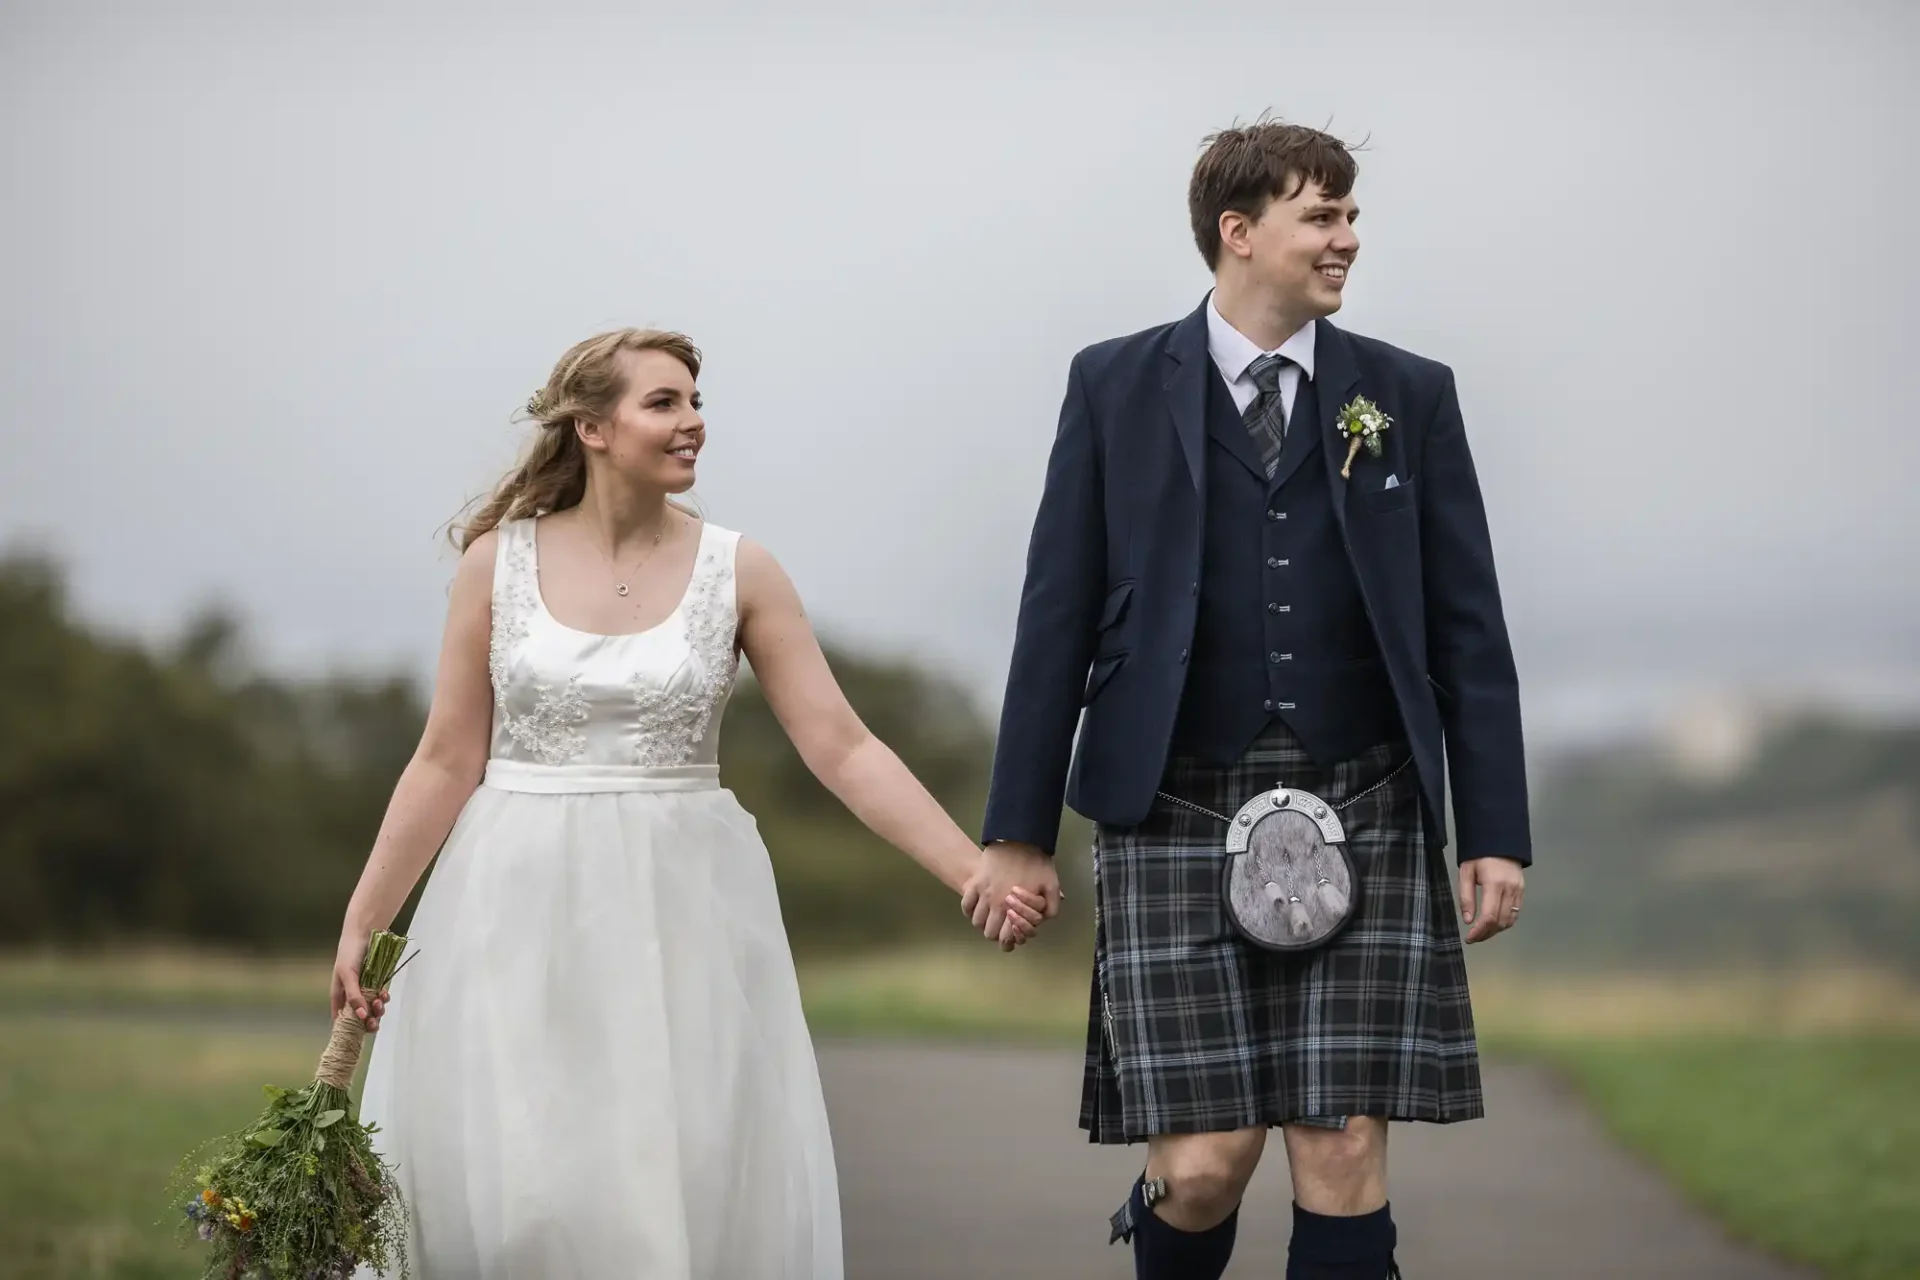 A bride and groom holding hands and walking on a pathway; the groom wears a kilt and the bride carries a bouquet, with a grassy field in the background.